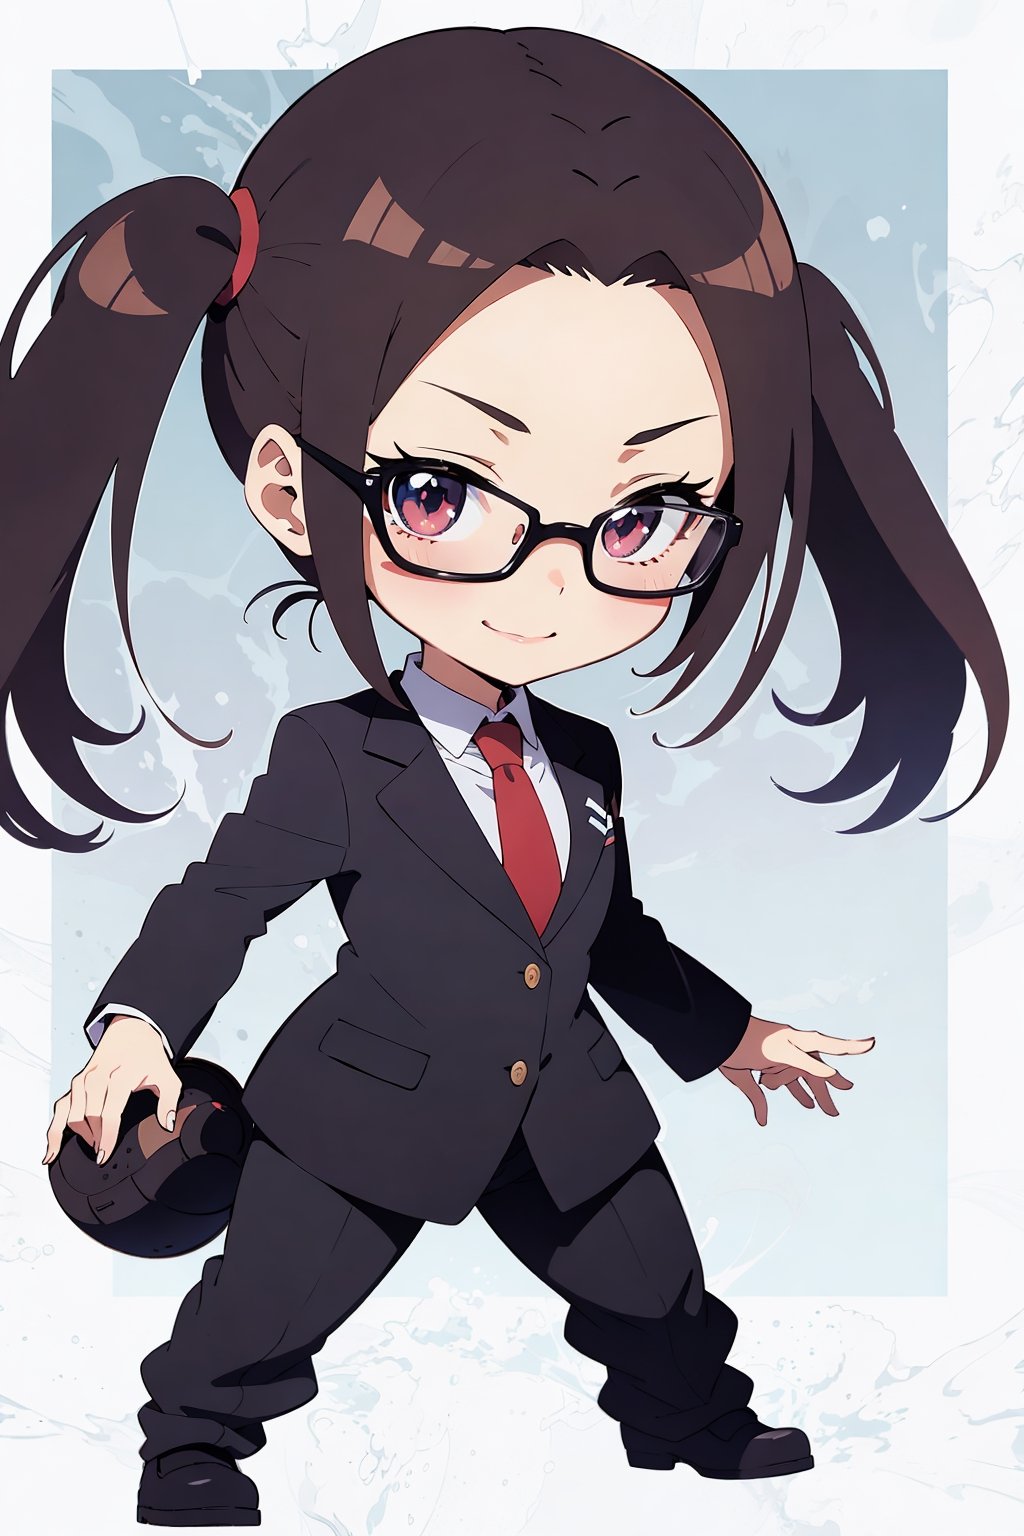 (chibi:1.5)fullbody, ten, tenten, 10, 1010, short twintails, RAW photo1girl, (suit:1.3), brown_eyes, black_hair, straight hair, lips, (forehead:1.3), cute, medium breasts, plump, petite, loli, glasses, , closed mouth, convergent strabismus, bashful, shy, blushing, smile, (anime:1.3)(illustration:1.3) BREAK morning, Cheerfully greeting everyone, colourful background, Model shooting style(anime:1.5)BREAK simple white background
